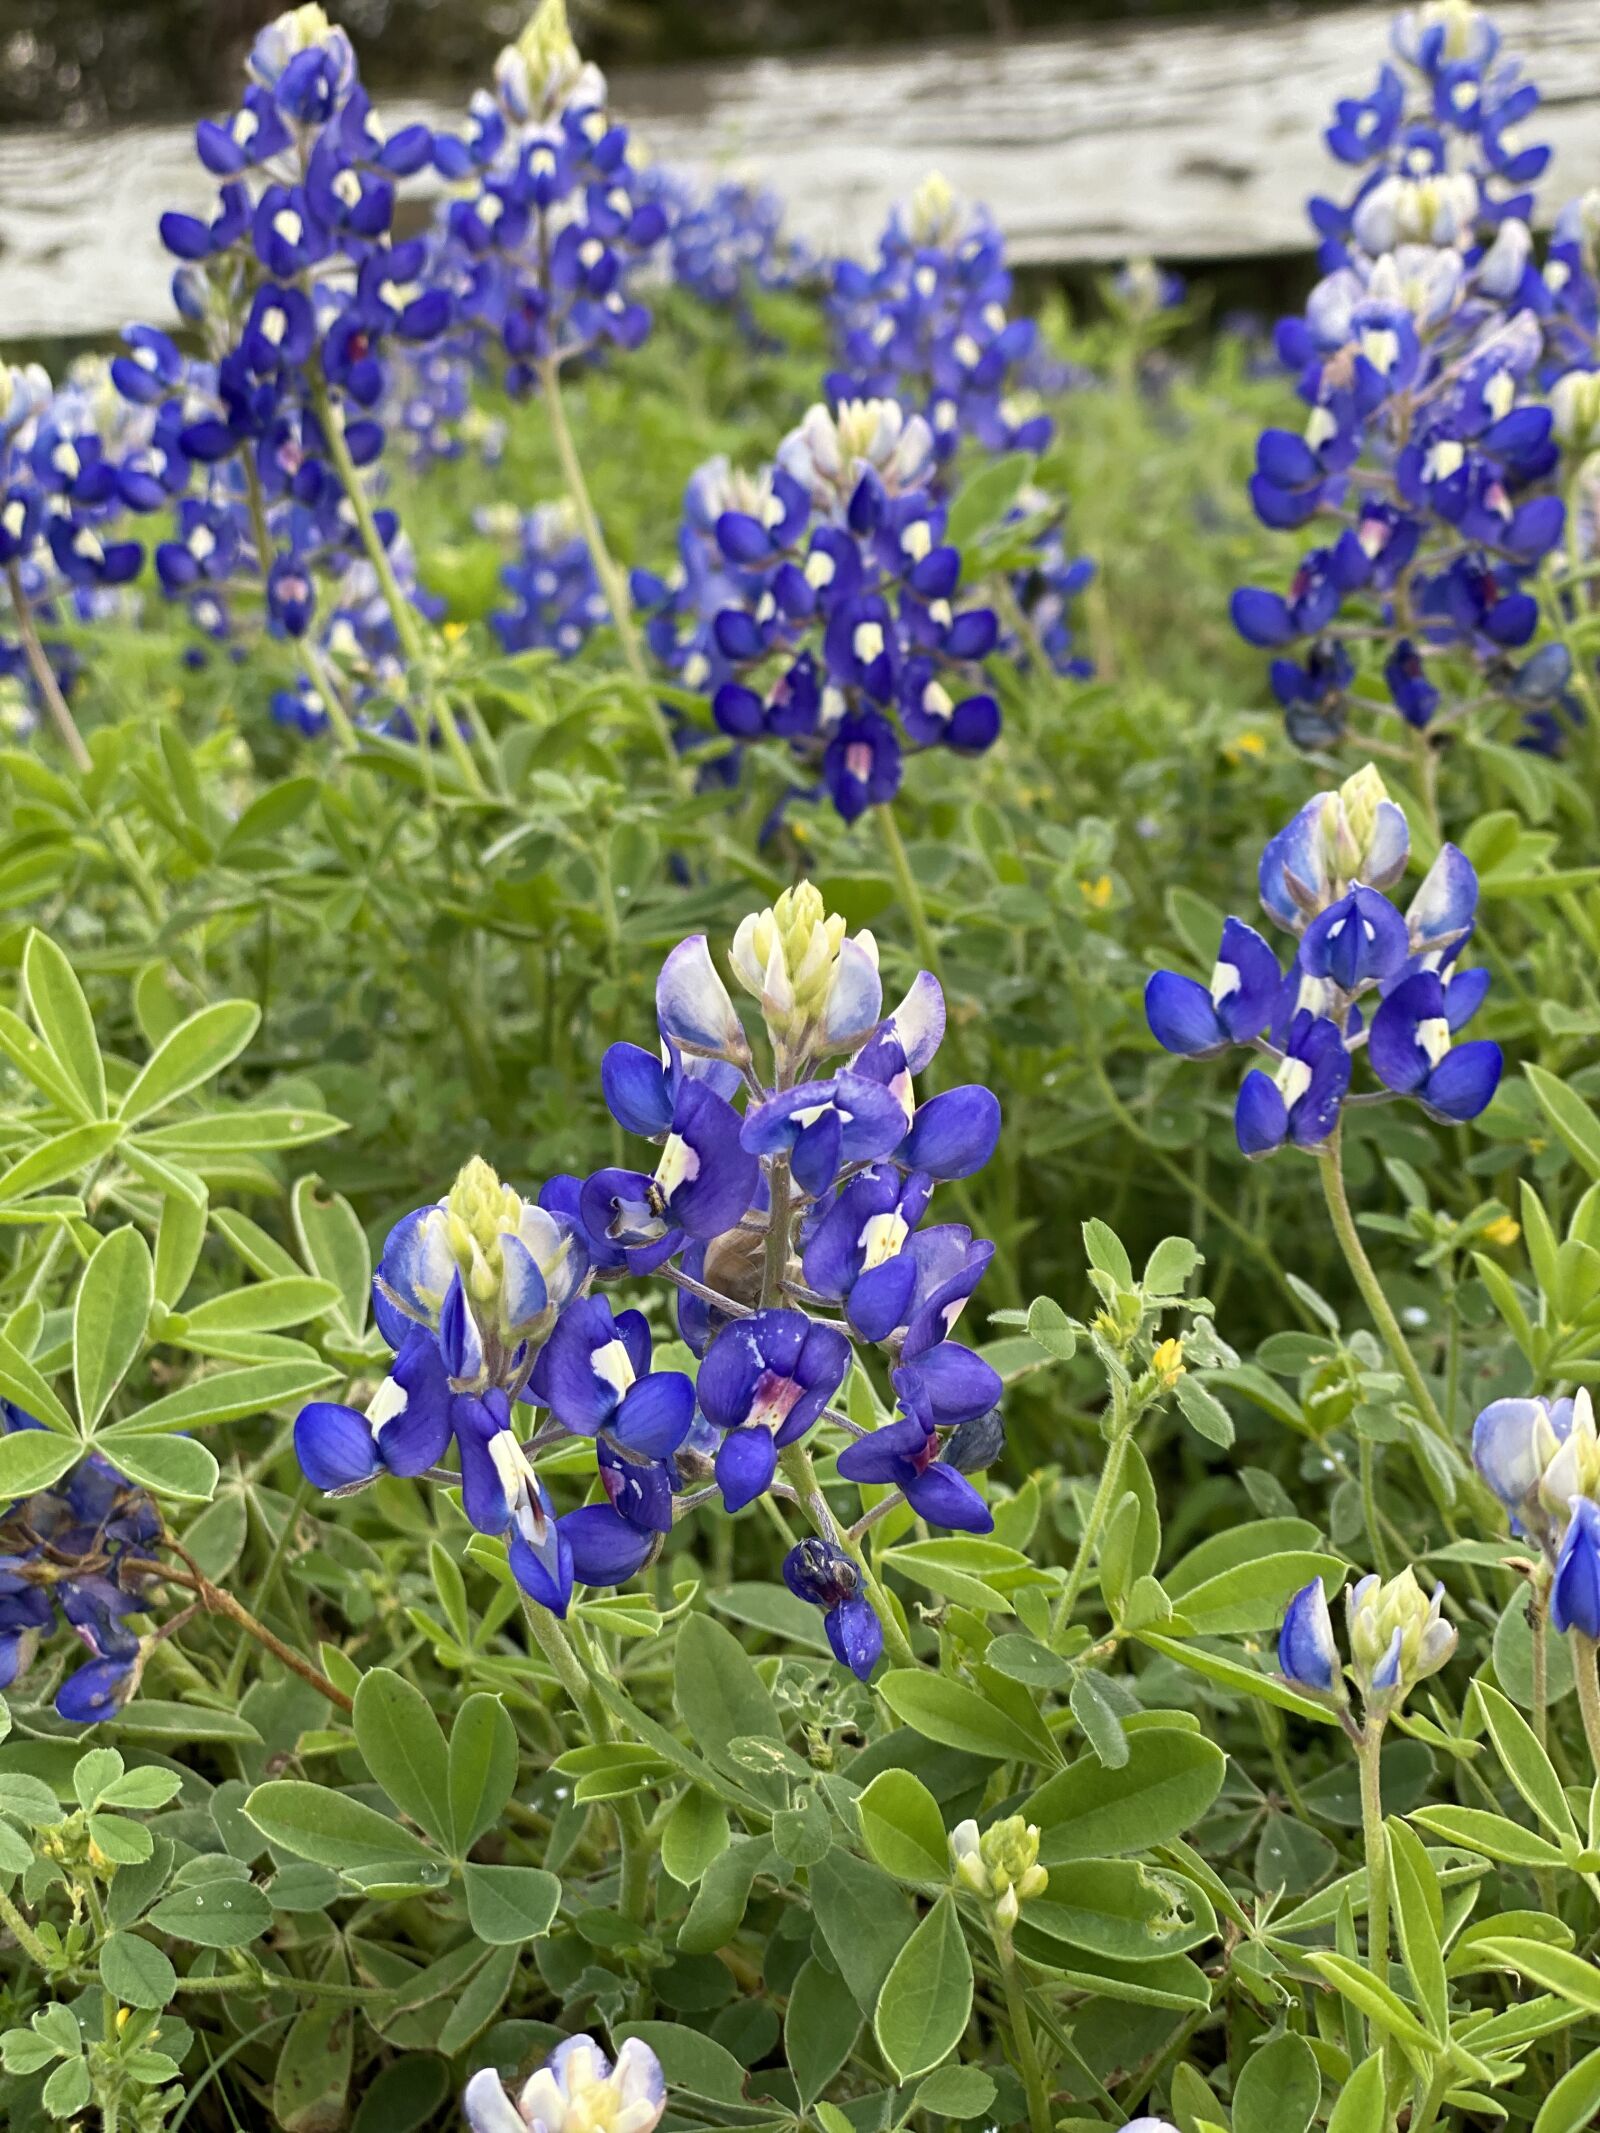 Apple iPhone 11 Pro Max + iPhone 11 Pro Max back dual camera 6mm f/2 sample photo. Bluebonnets, fence, texas flower photography